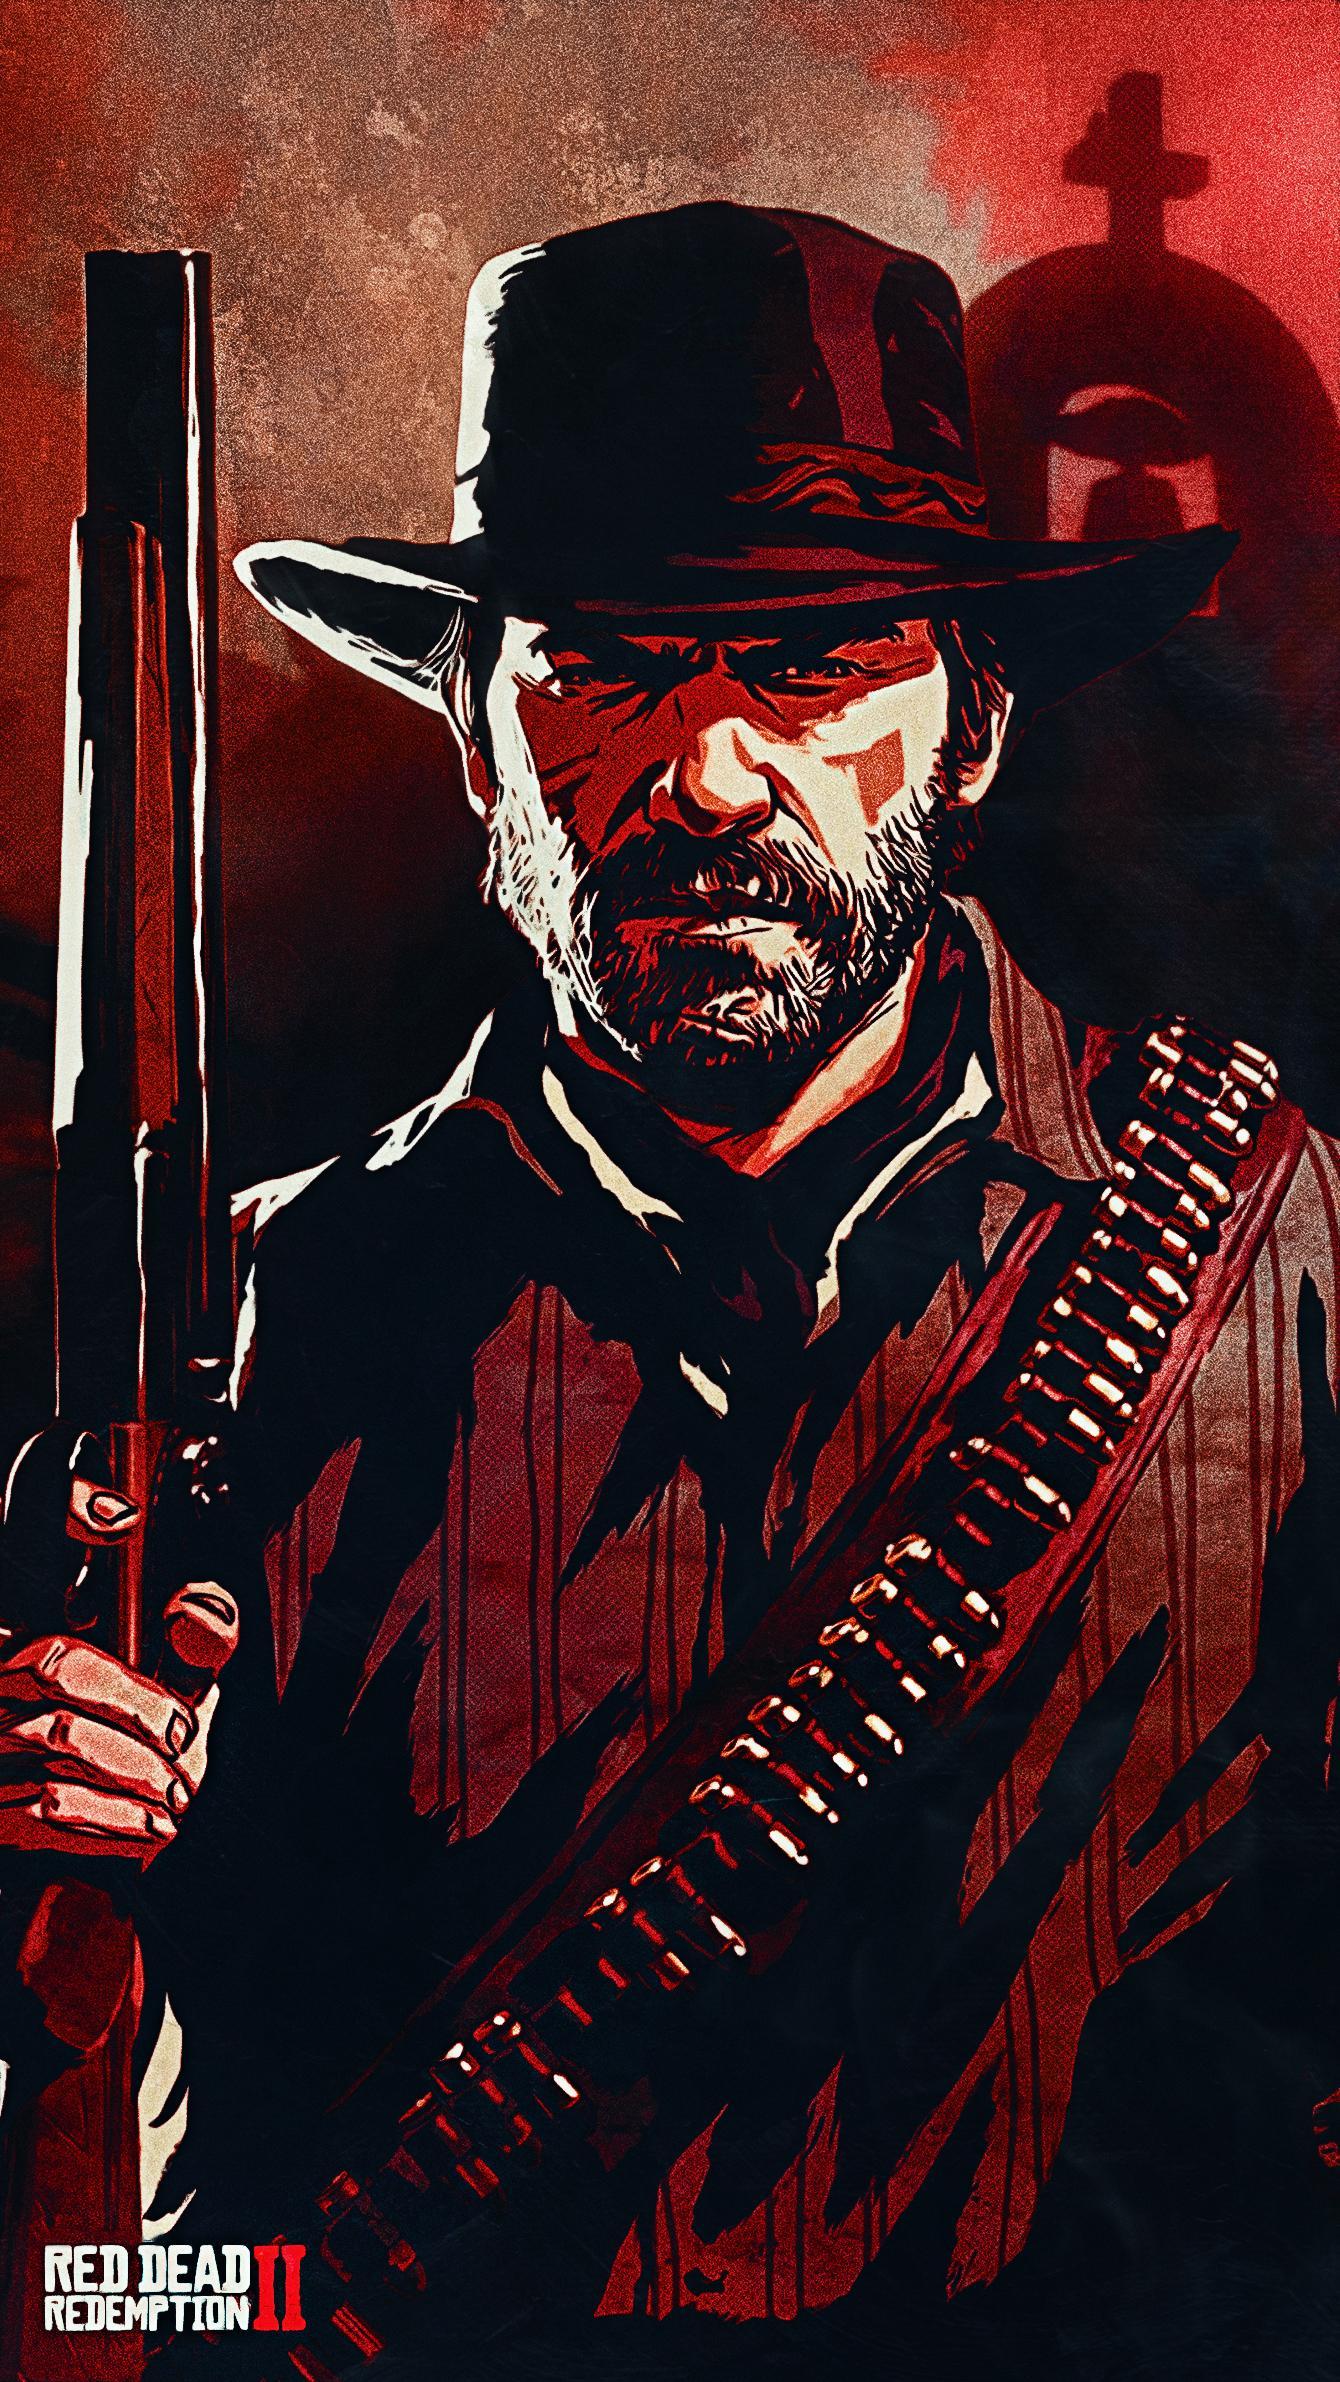 Wallpaper ID 424205  Video Game Red Dead Redemption 2 Phone Wallpaper  Arthur Morgan 828x1792 free download